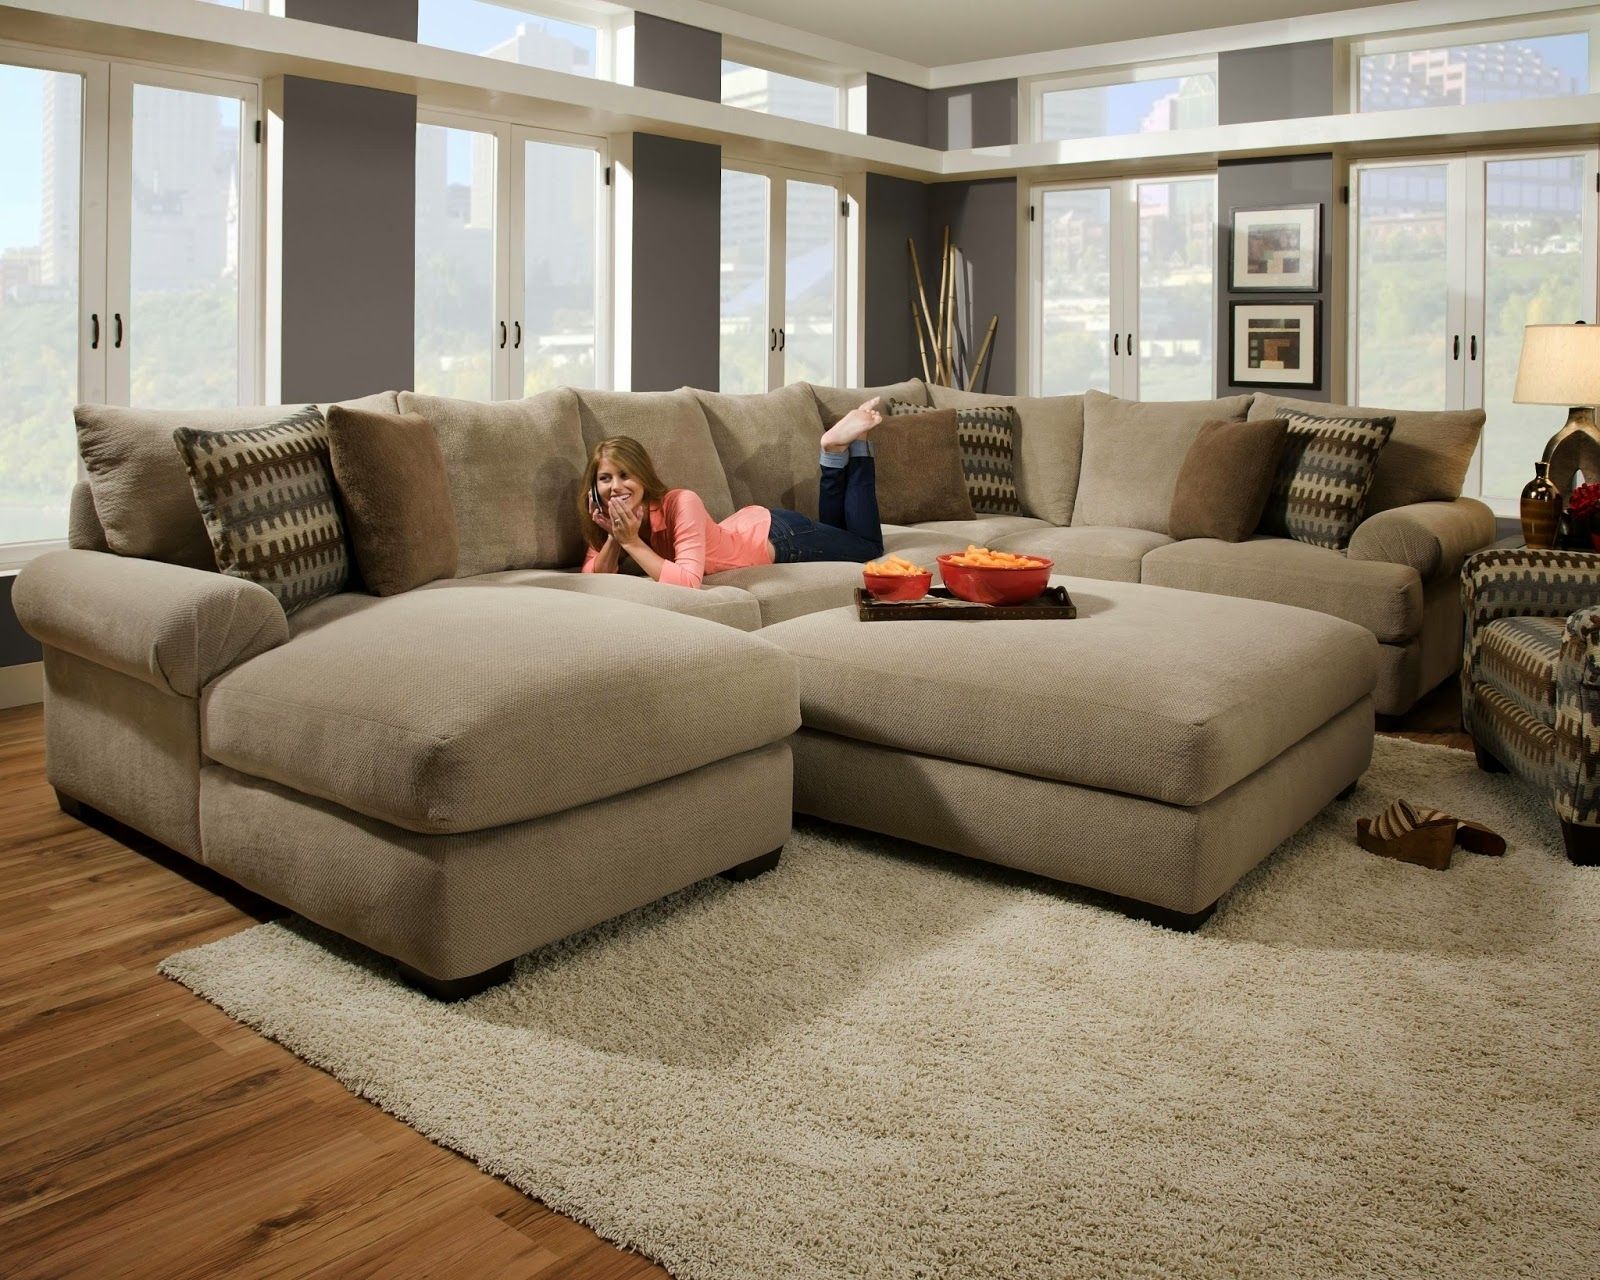 How To Configure A Sectional Sofa – Image To U Within Microfiber Sectional Corner Sofas (View 16 of 20)